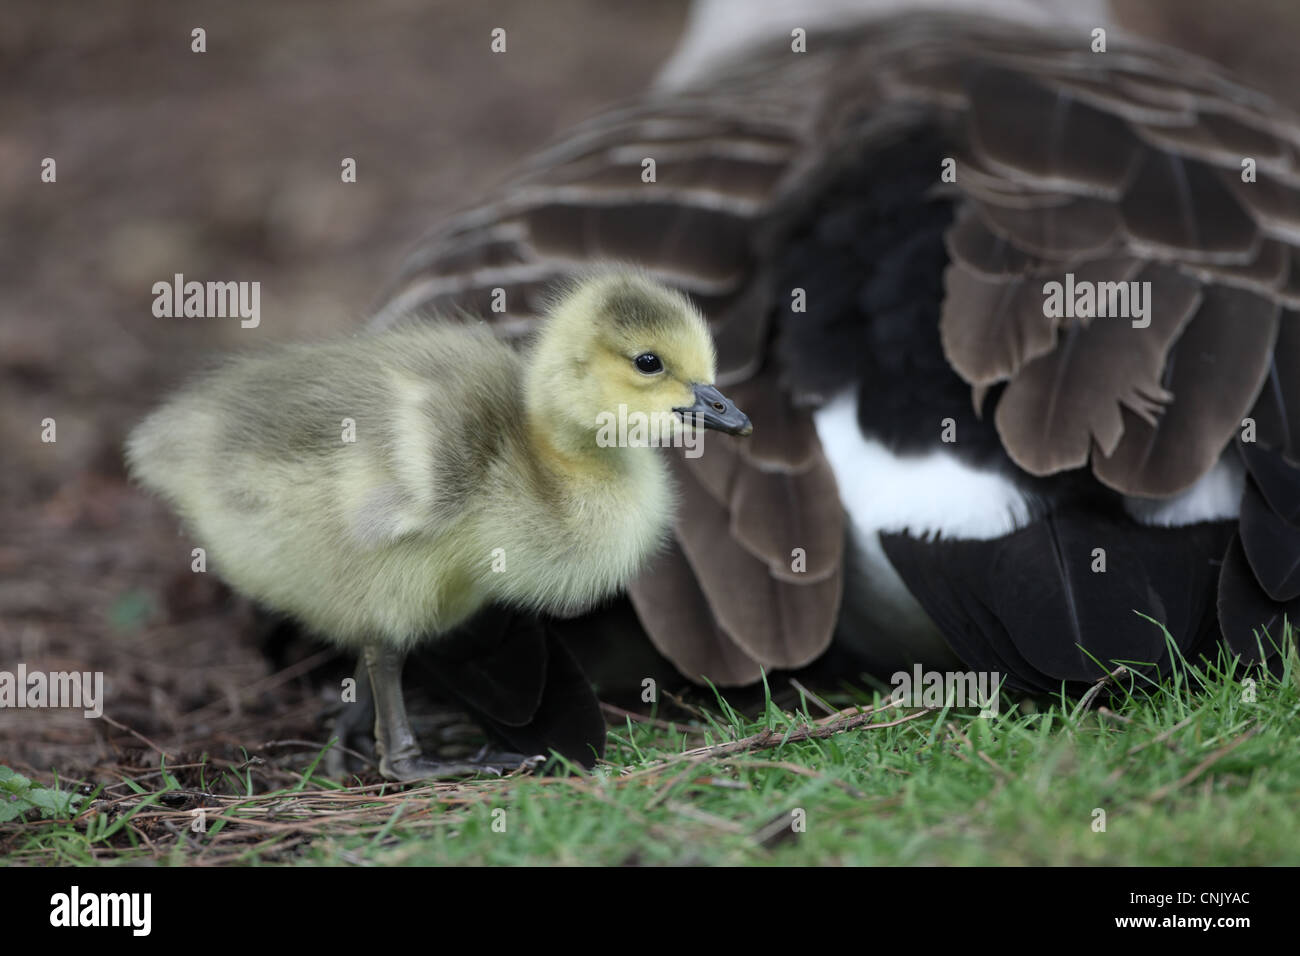 Canada Goose (Branta canadensis) introduced species, gosling, standing beside parent, London, England, may Stock Photo